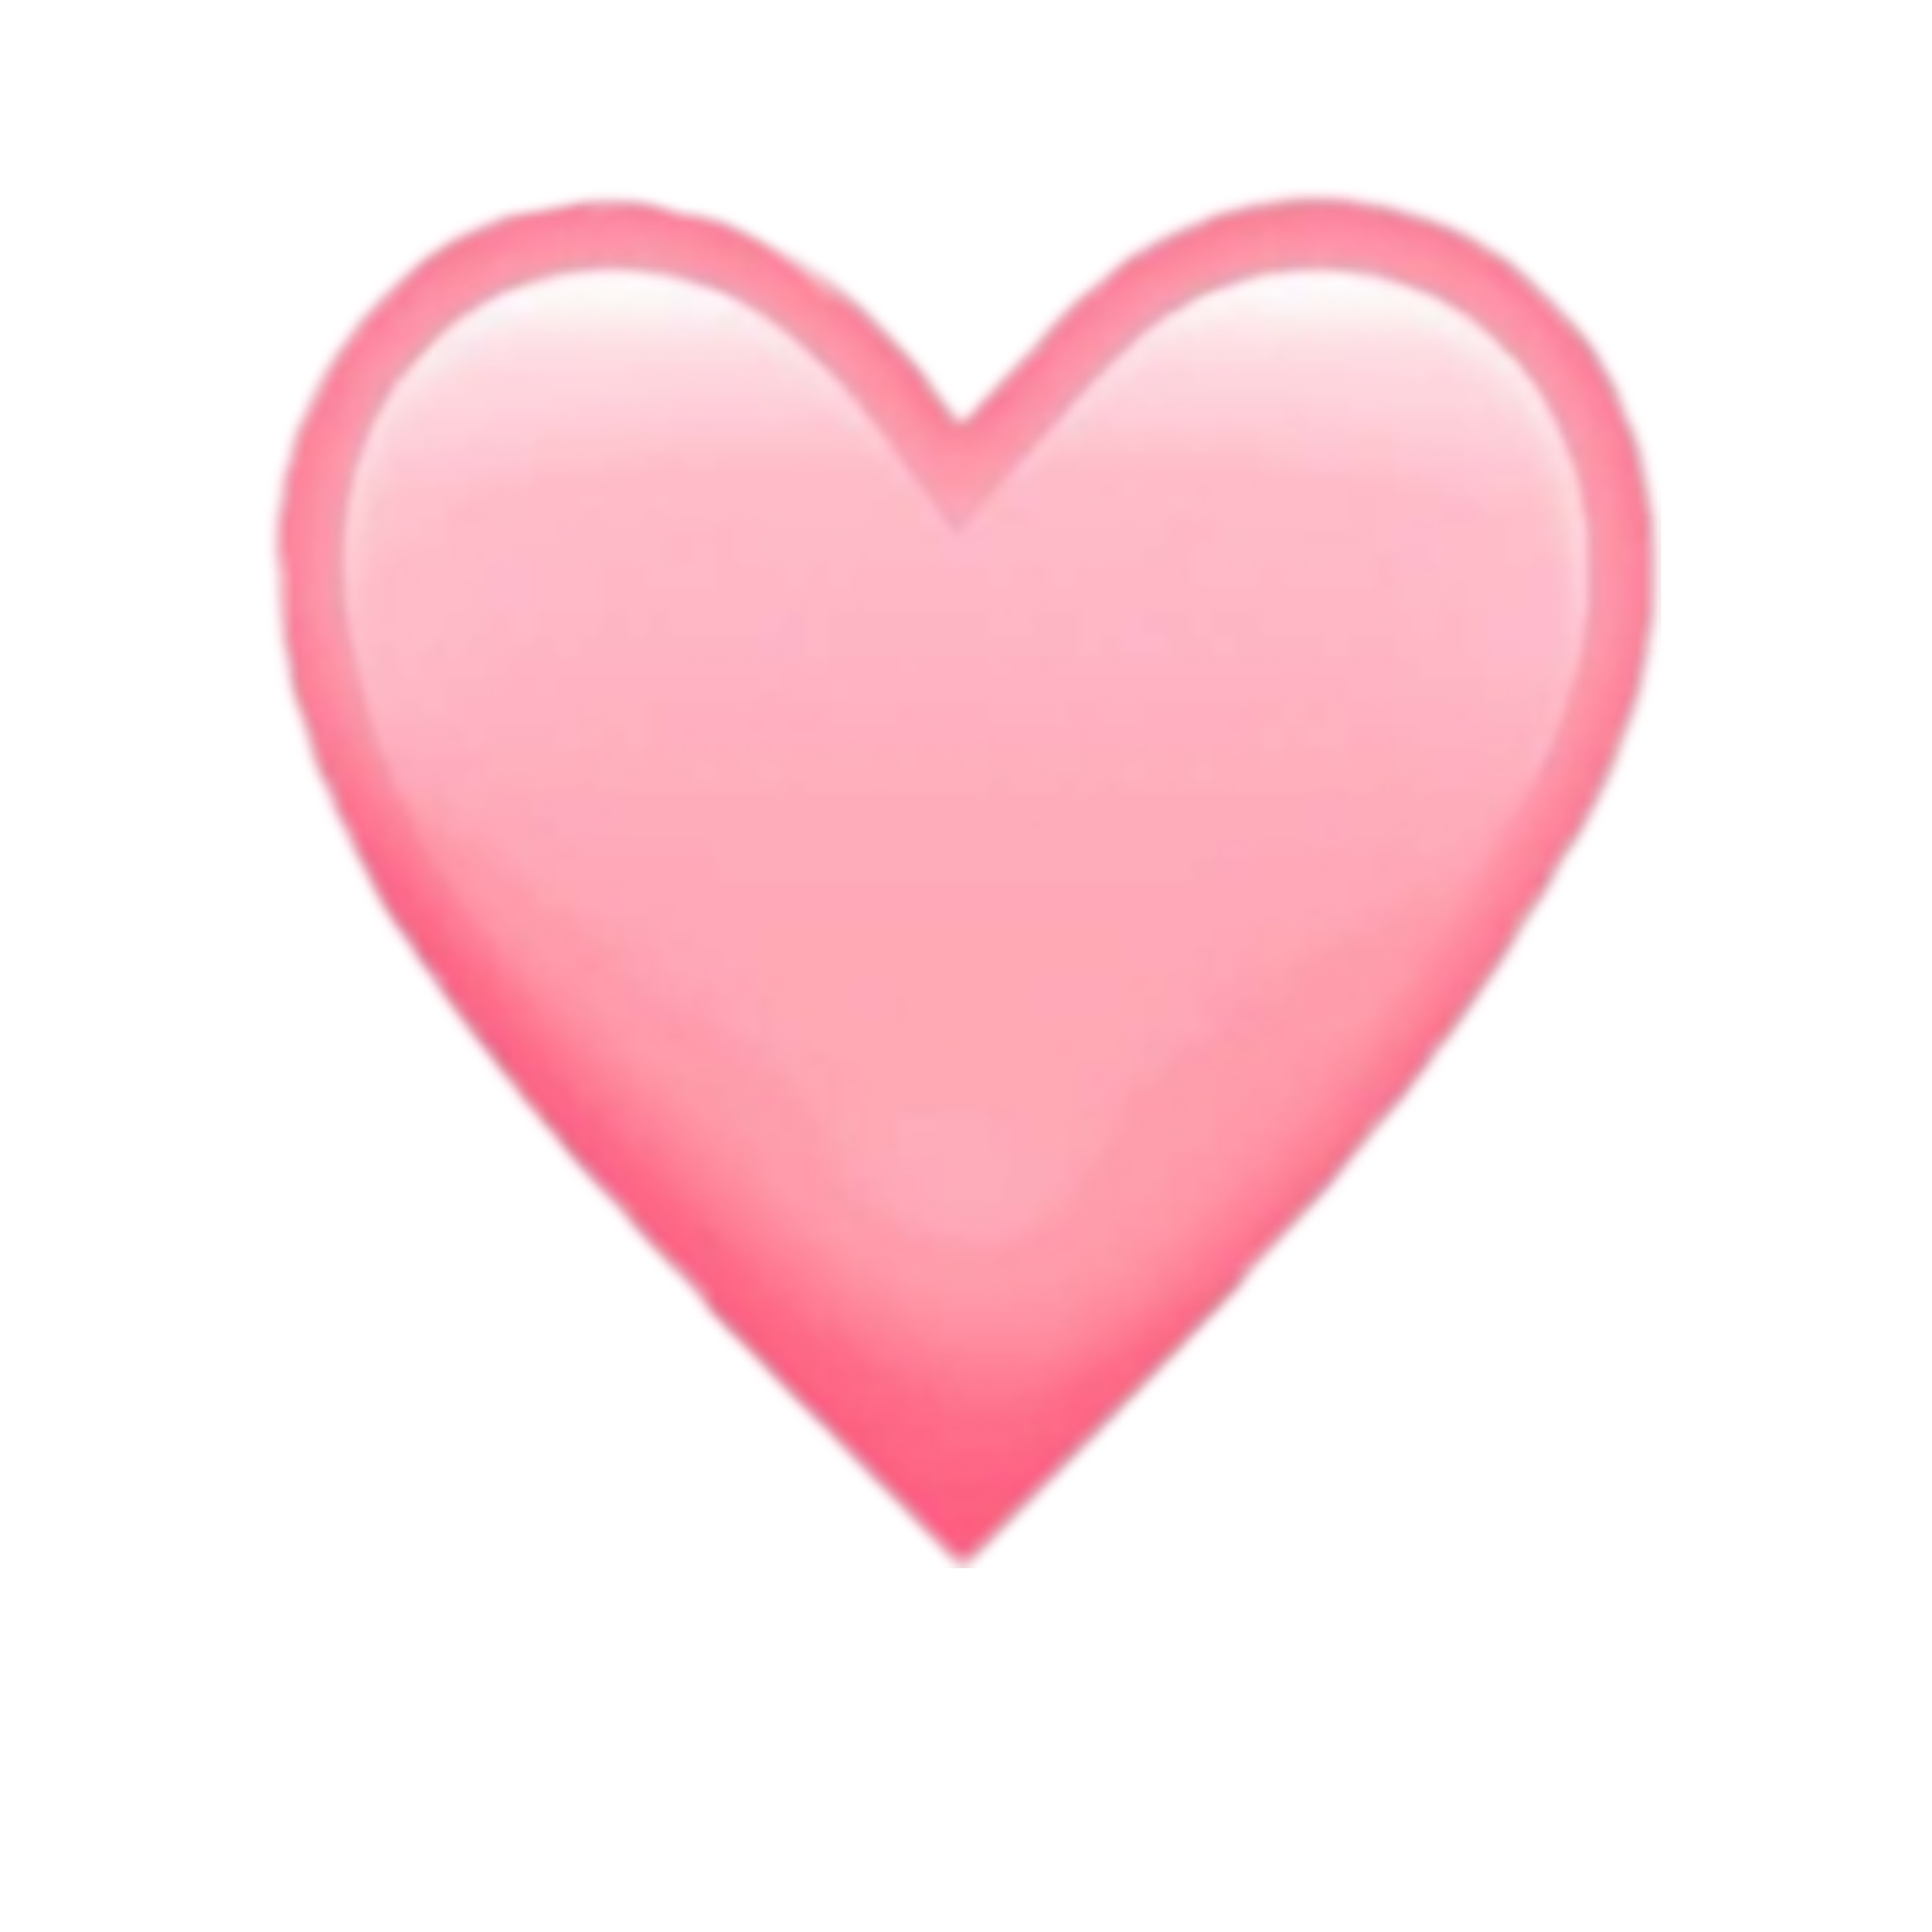 Transparent Background Aesthetic Pink Heart Emoji Png Fionaramey Images And Photos Finder